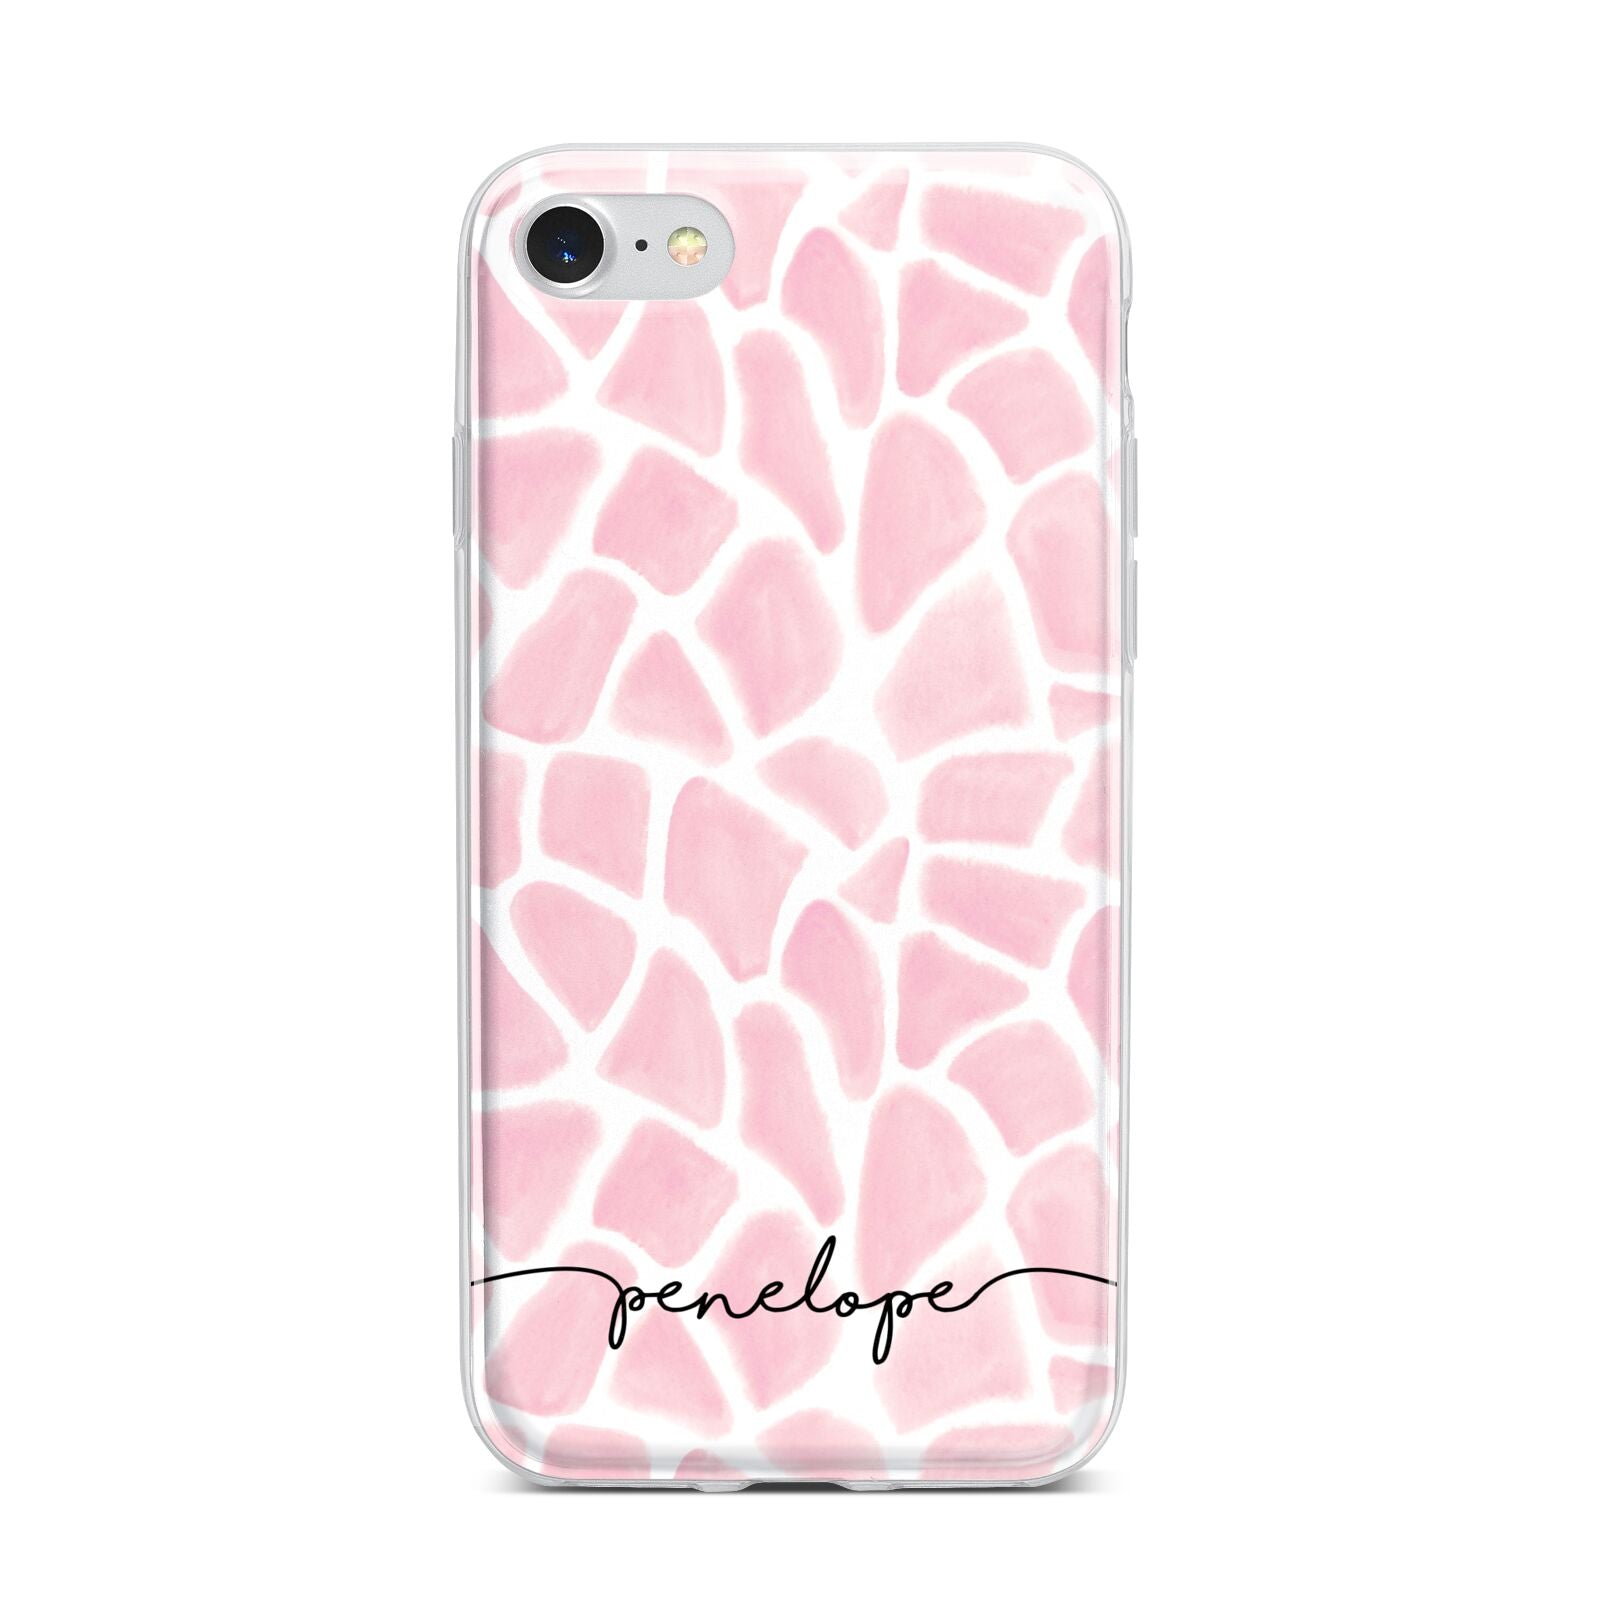 Personalised Pink Giraffe Print iPhone 7 Bumper Case on Silver iPhone